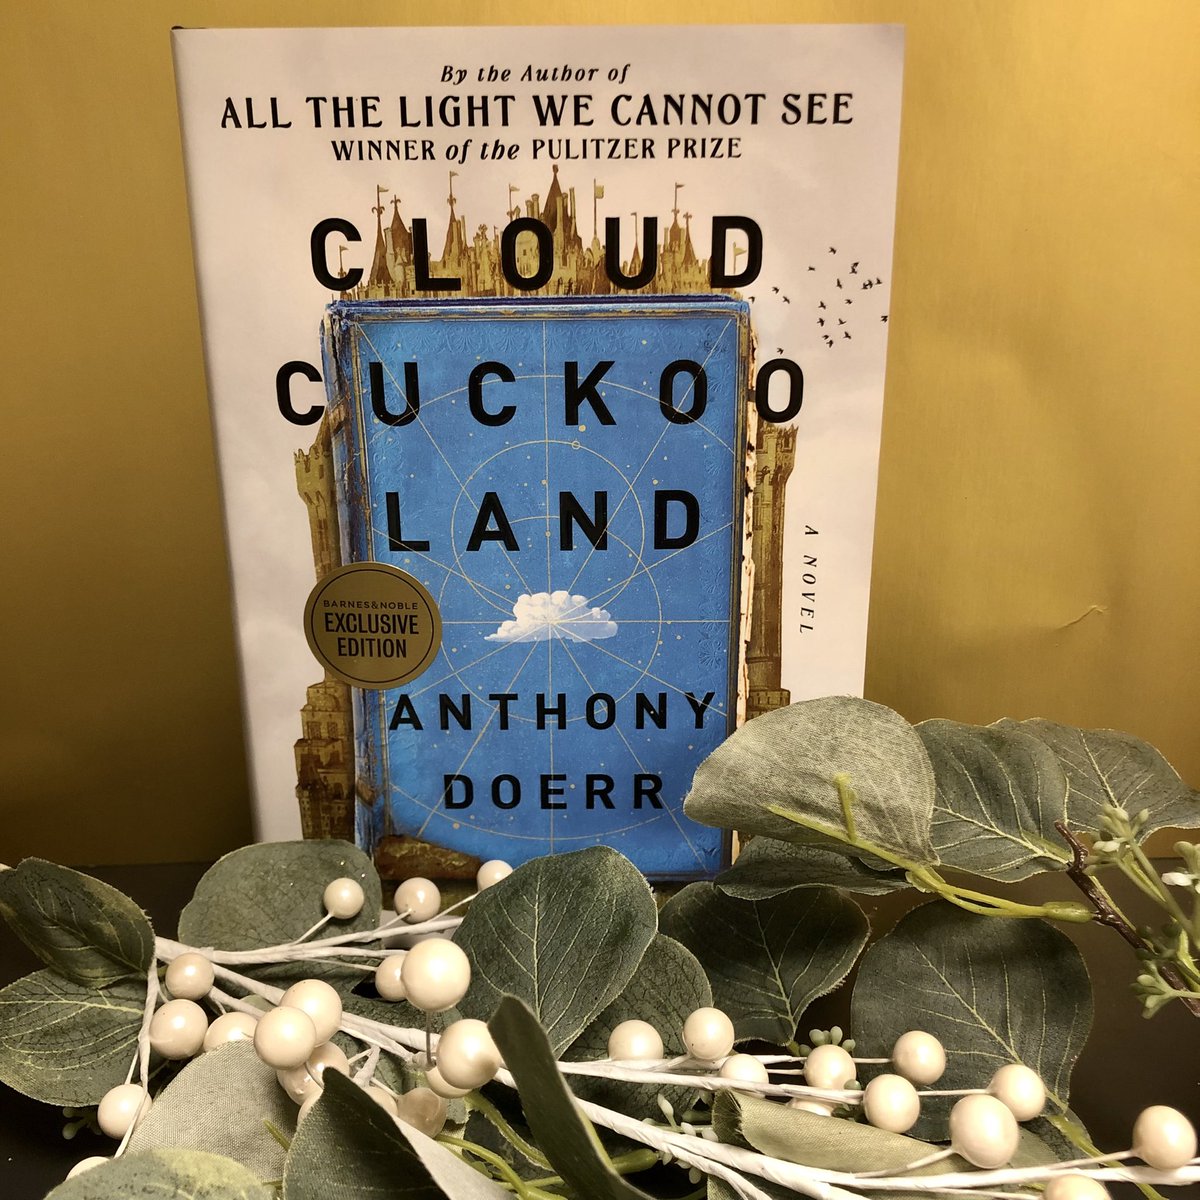 You know him, you love him, and now he is back with an all new instant modern classic. Don’t miss out and nab a copy of Anthony Doerr’s newest novel Cloud Cuckoo Land. It is a love letter to book lovers. Grab your copy today!